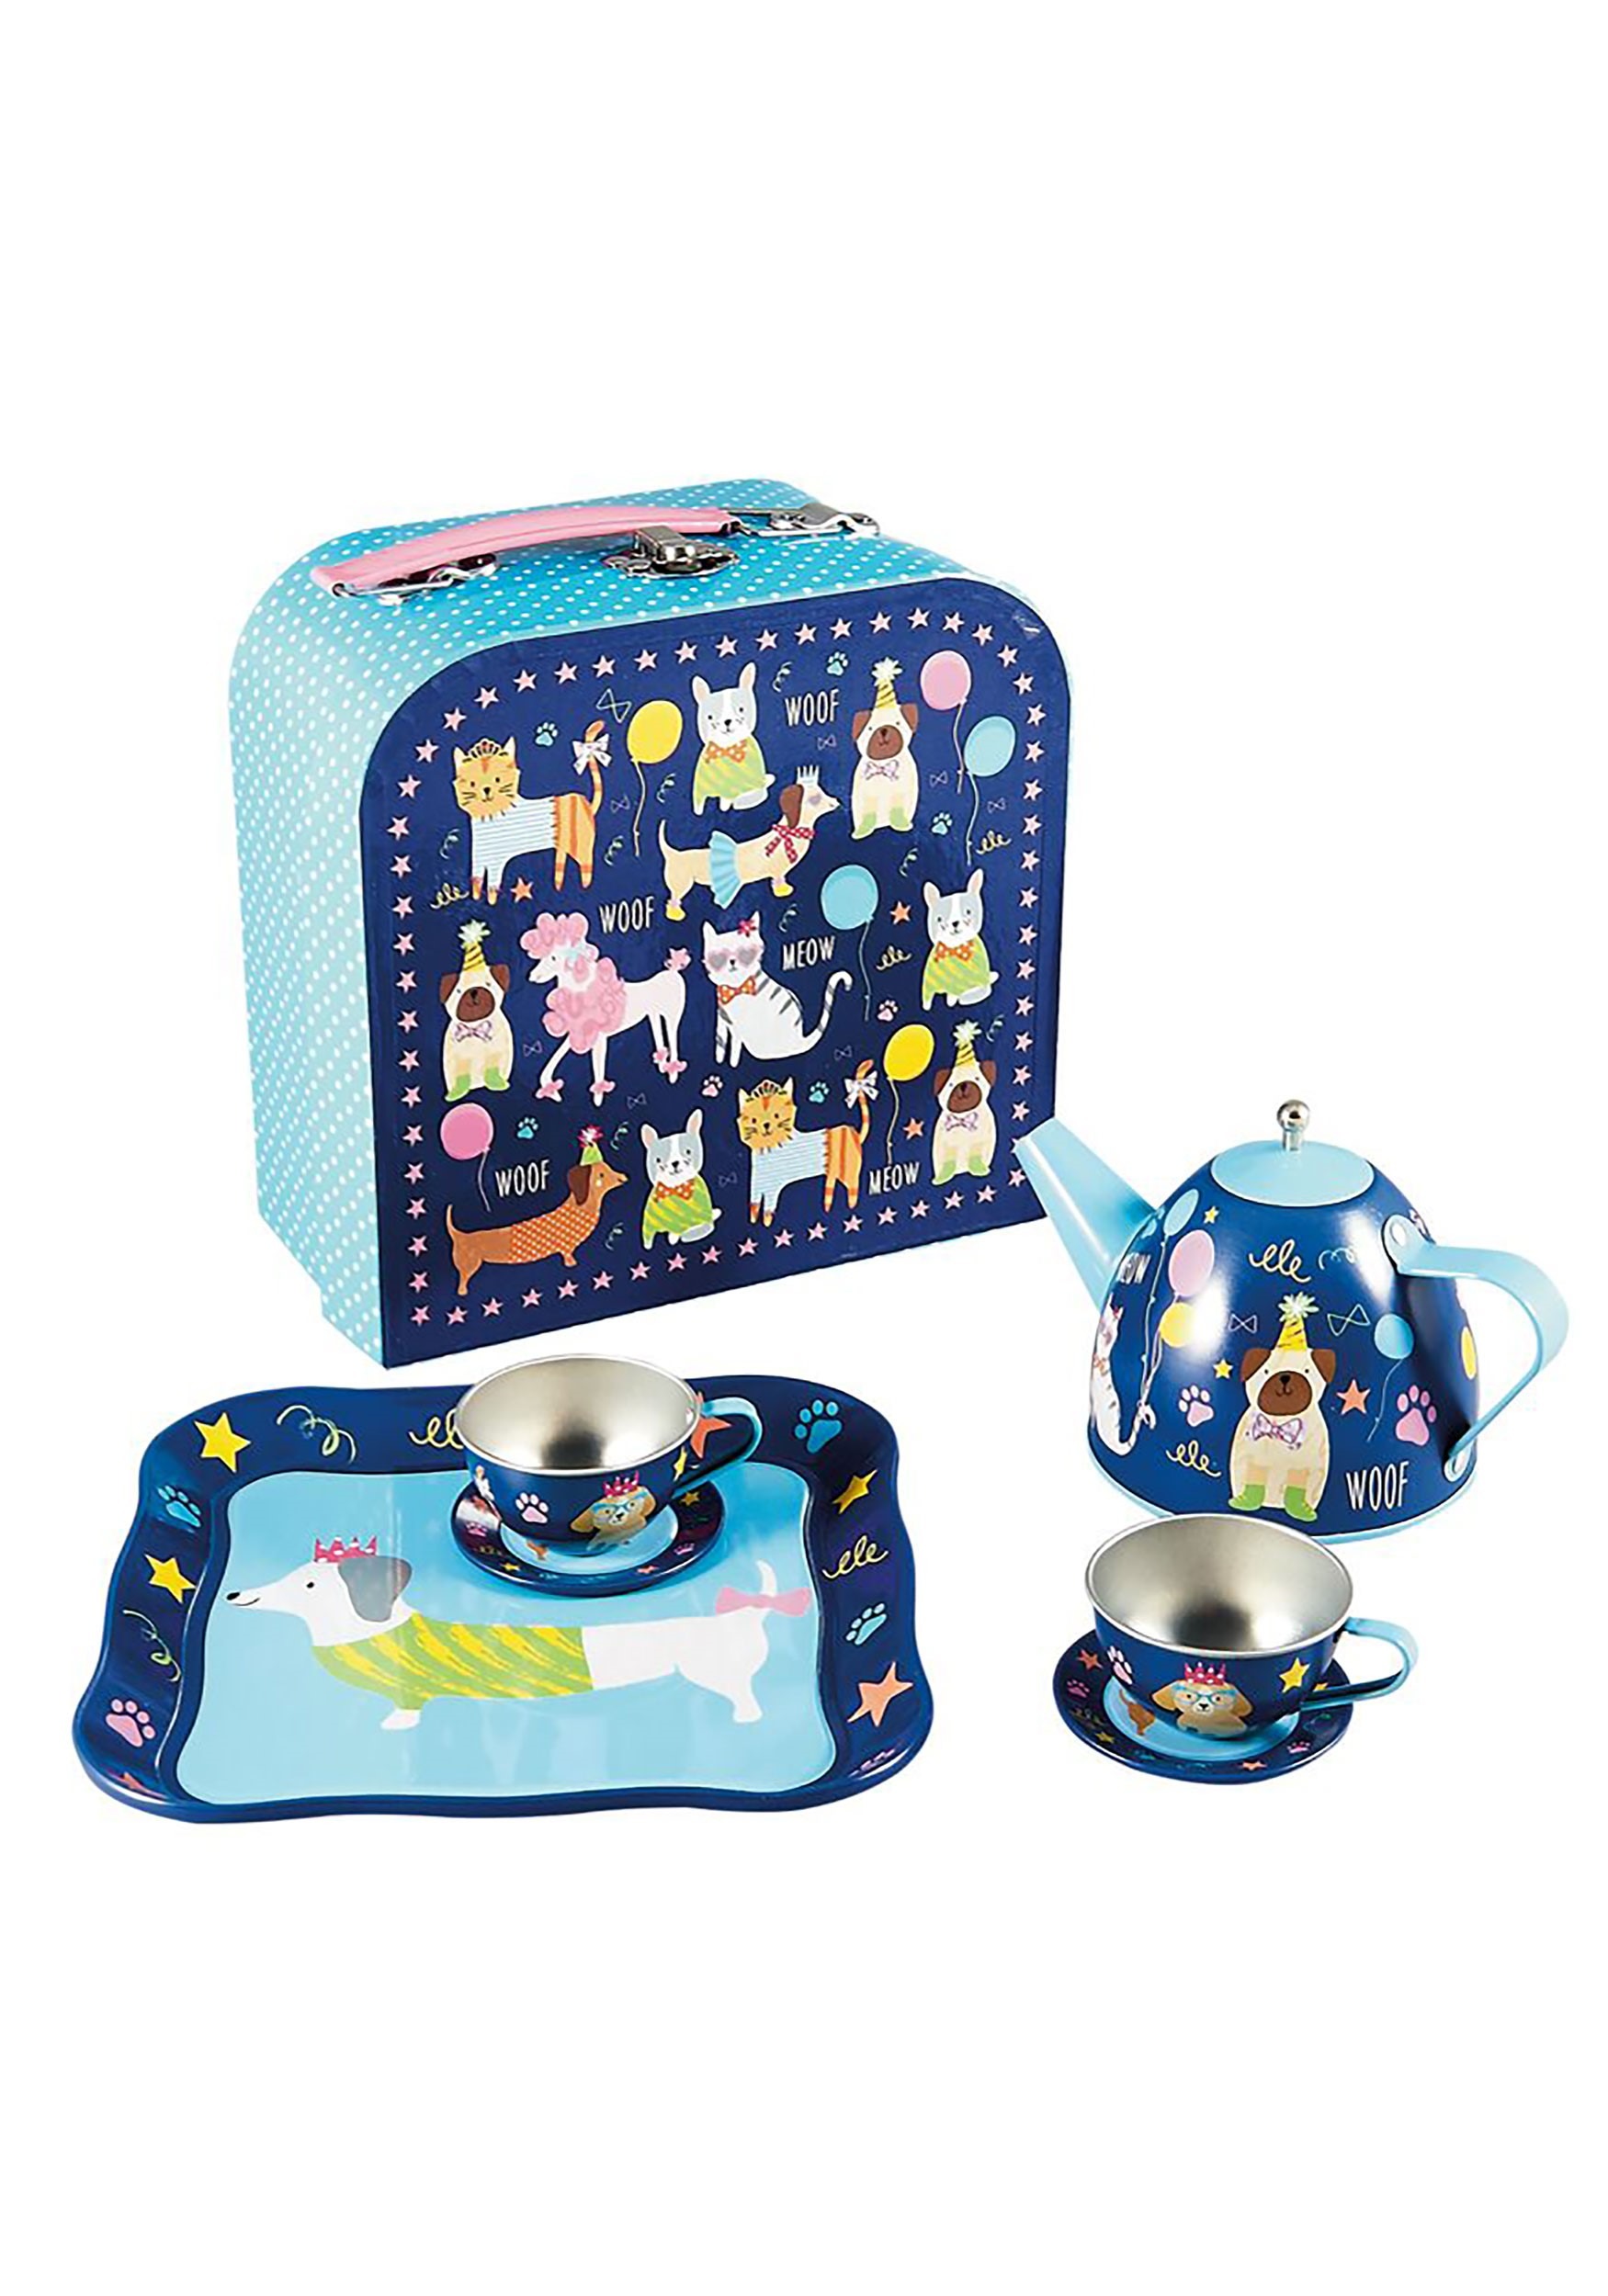 Pets Print (Dogs and Cats) Tin Tea Set in Case- 7pc